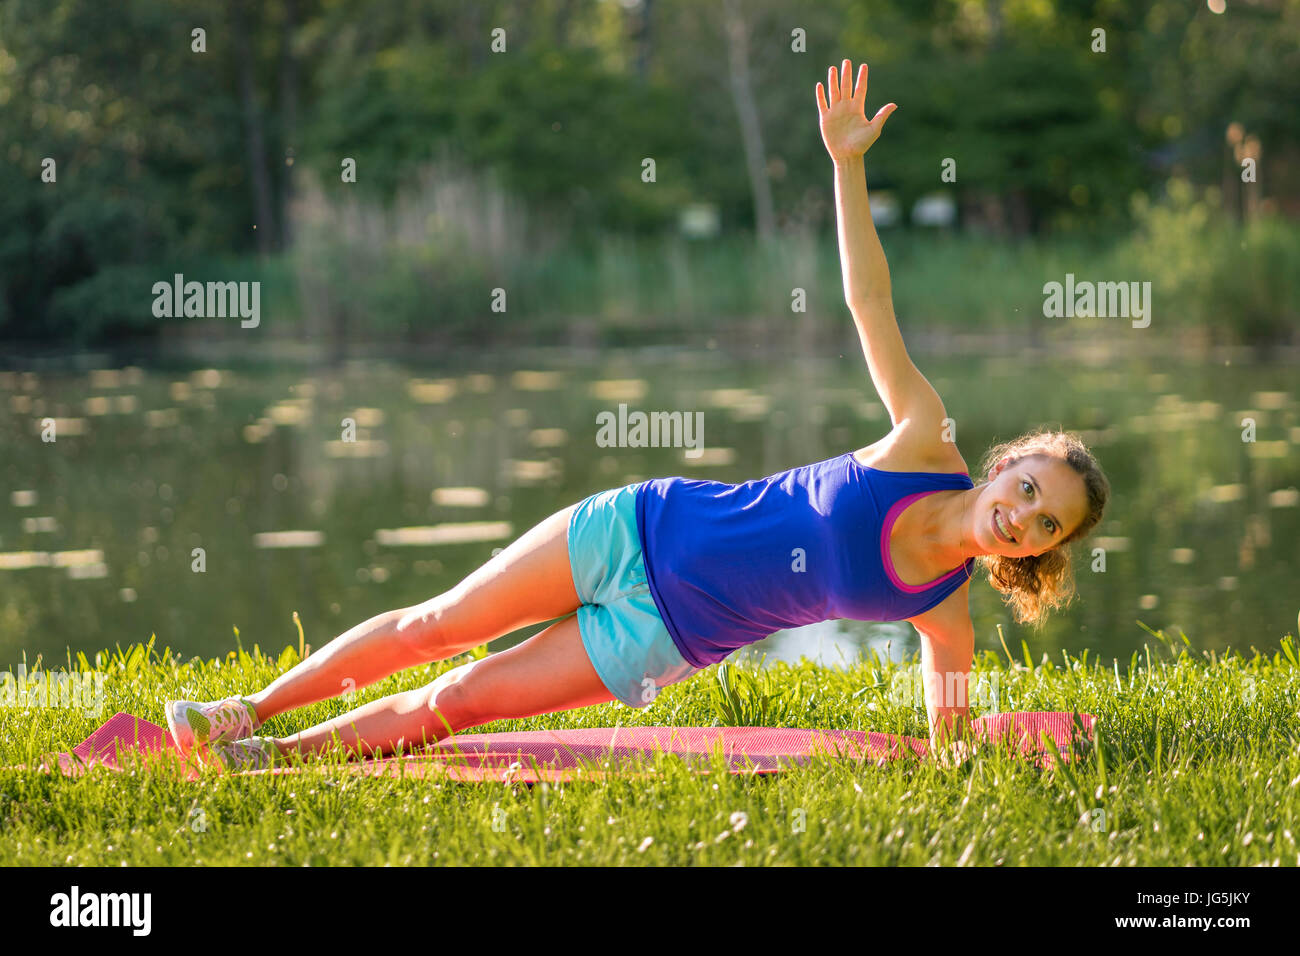 Woman during fitness training, slim, athletic, Talaue Waiblingen, Baden-Württemberg, Germany Stock Photo